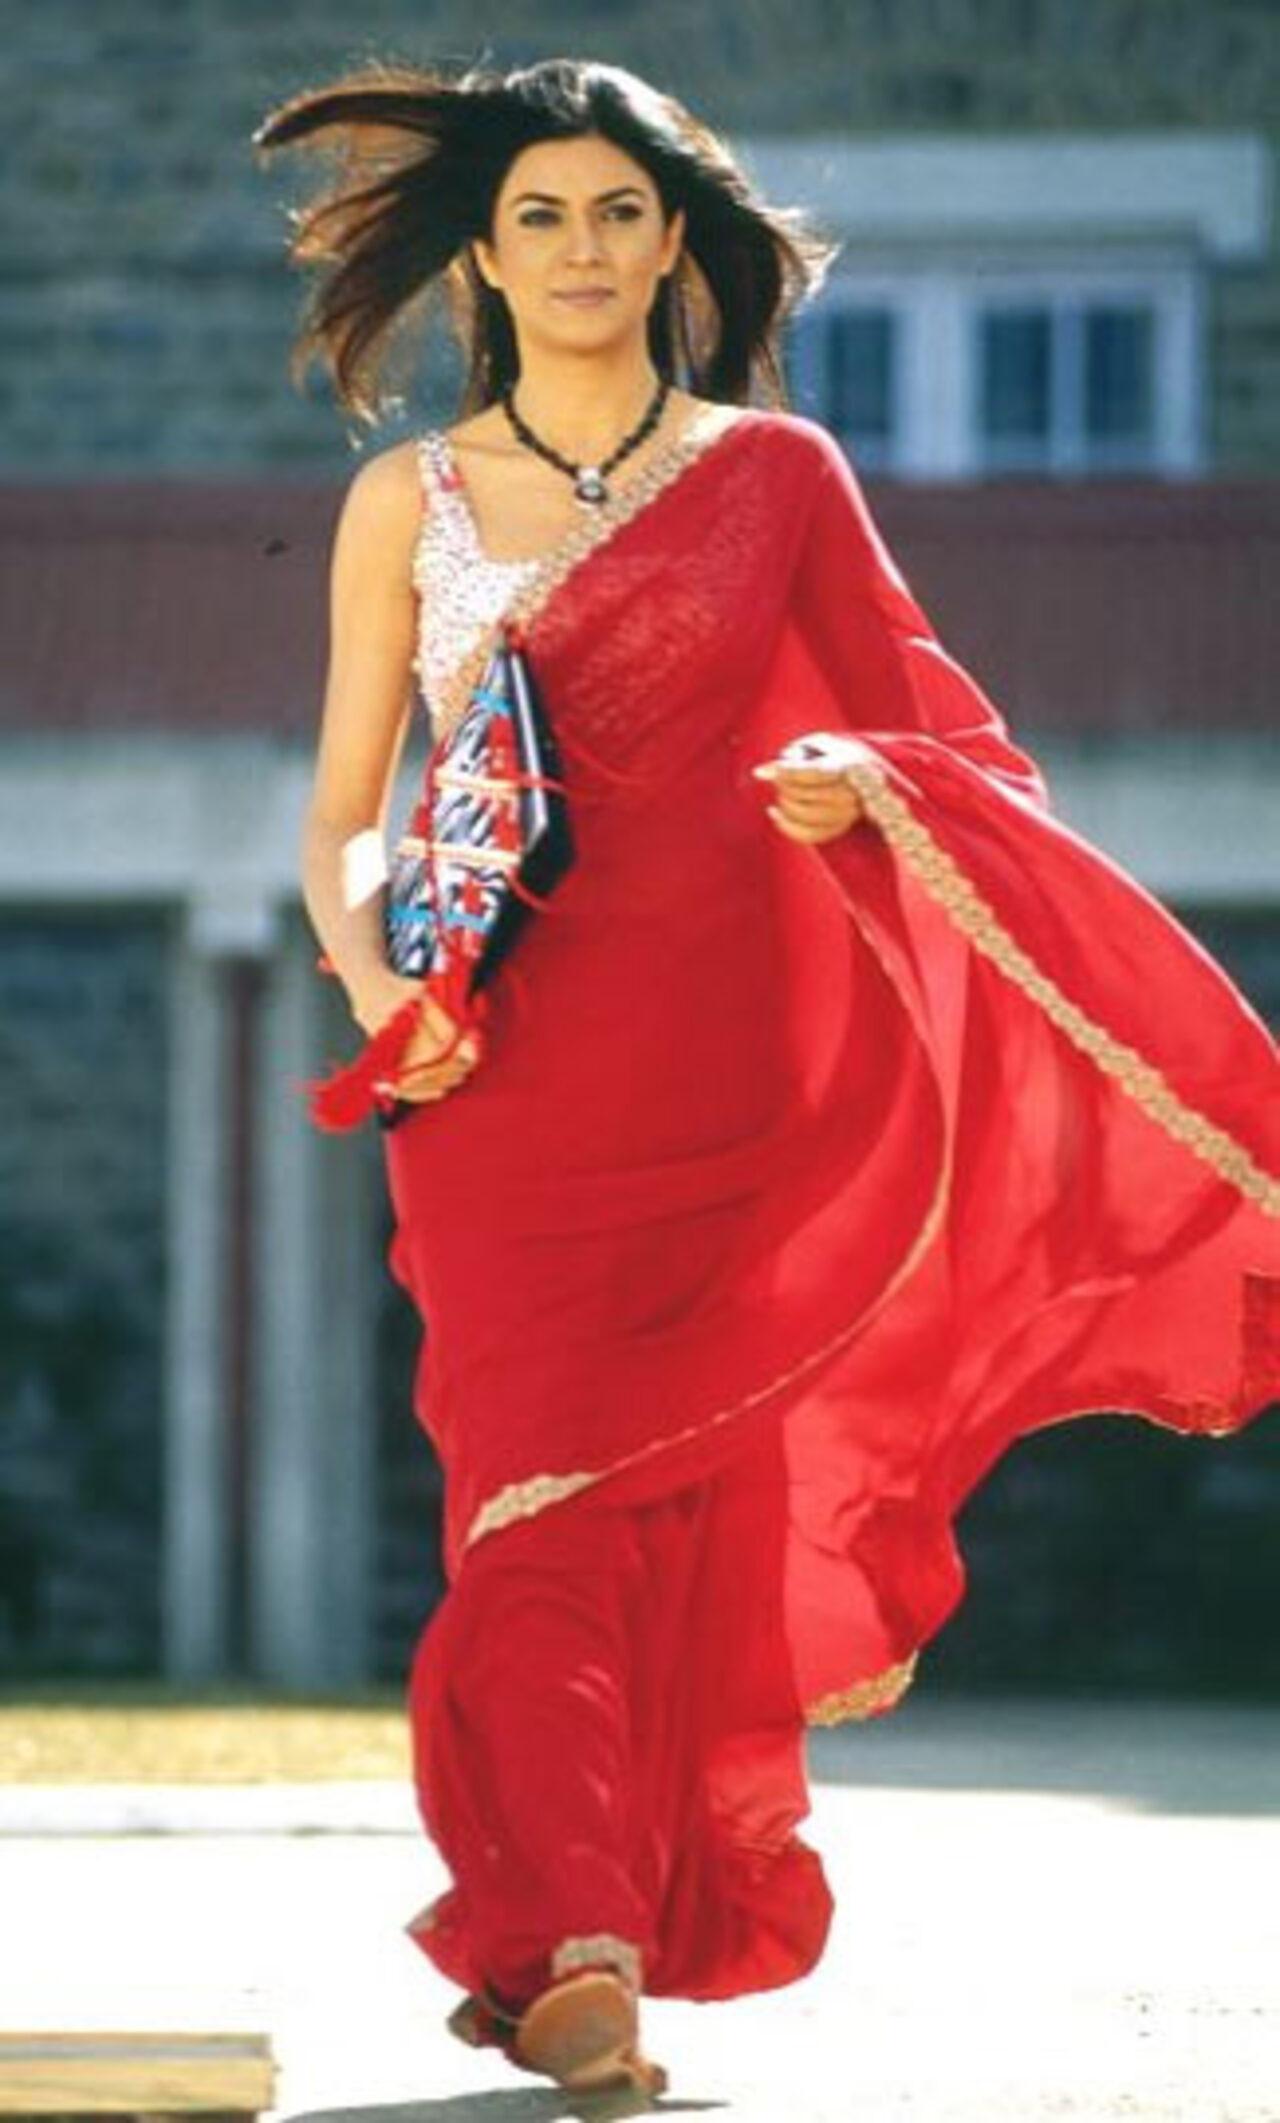 One might not remember what subject Miss Chandni (Sushmita Sen) from 'Main Hoon Na' taught but can sure describe the beauty of her sarees